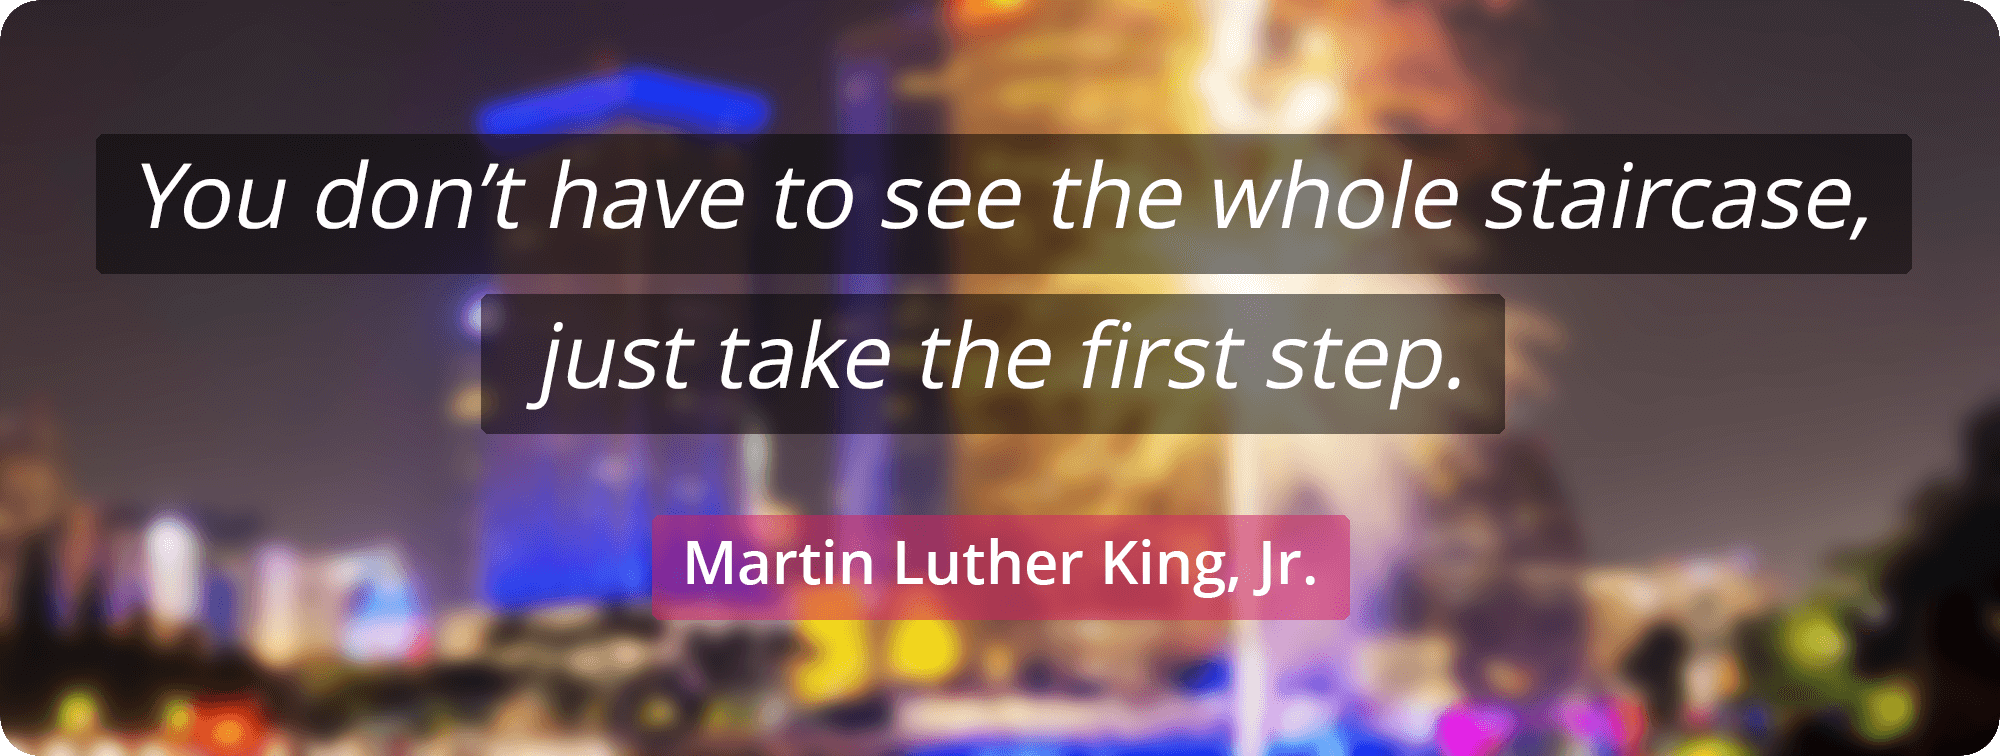 You don't have to see the whole staircase, just take the first step. - Martin Luther King, Jr.